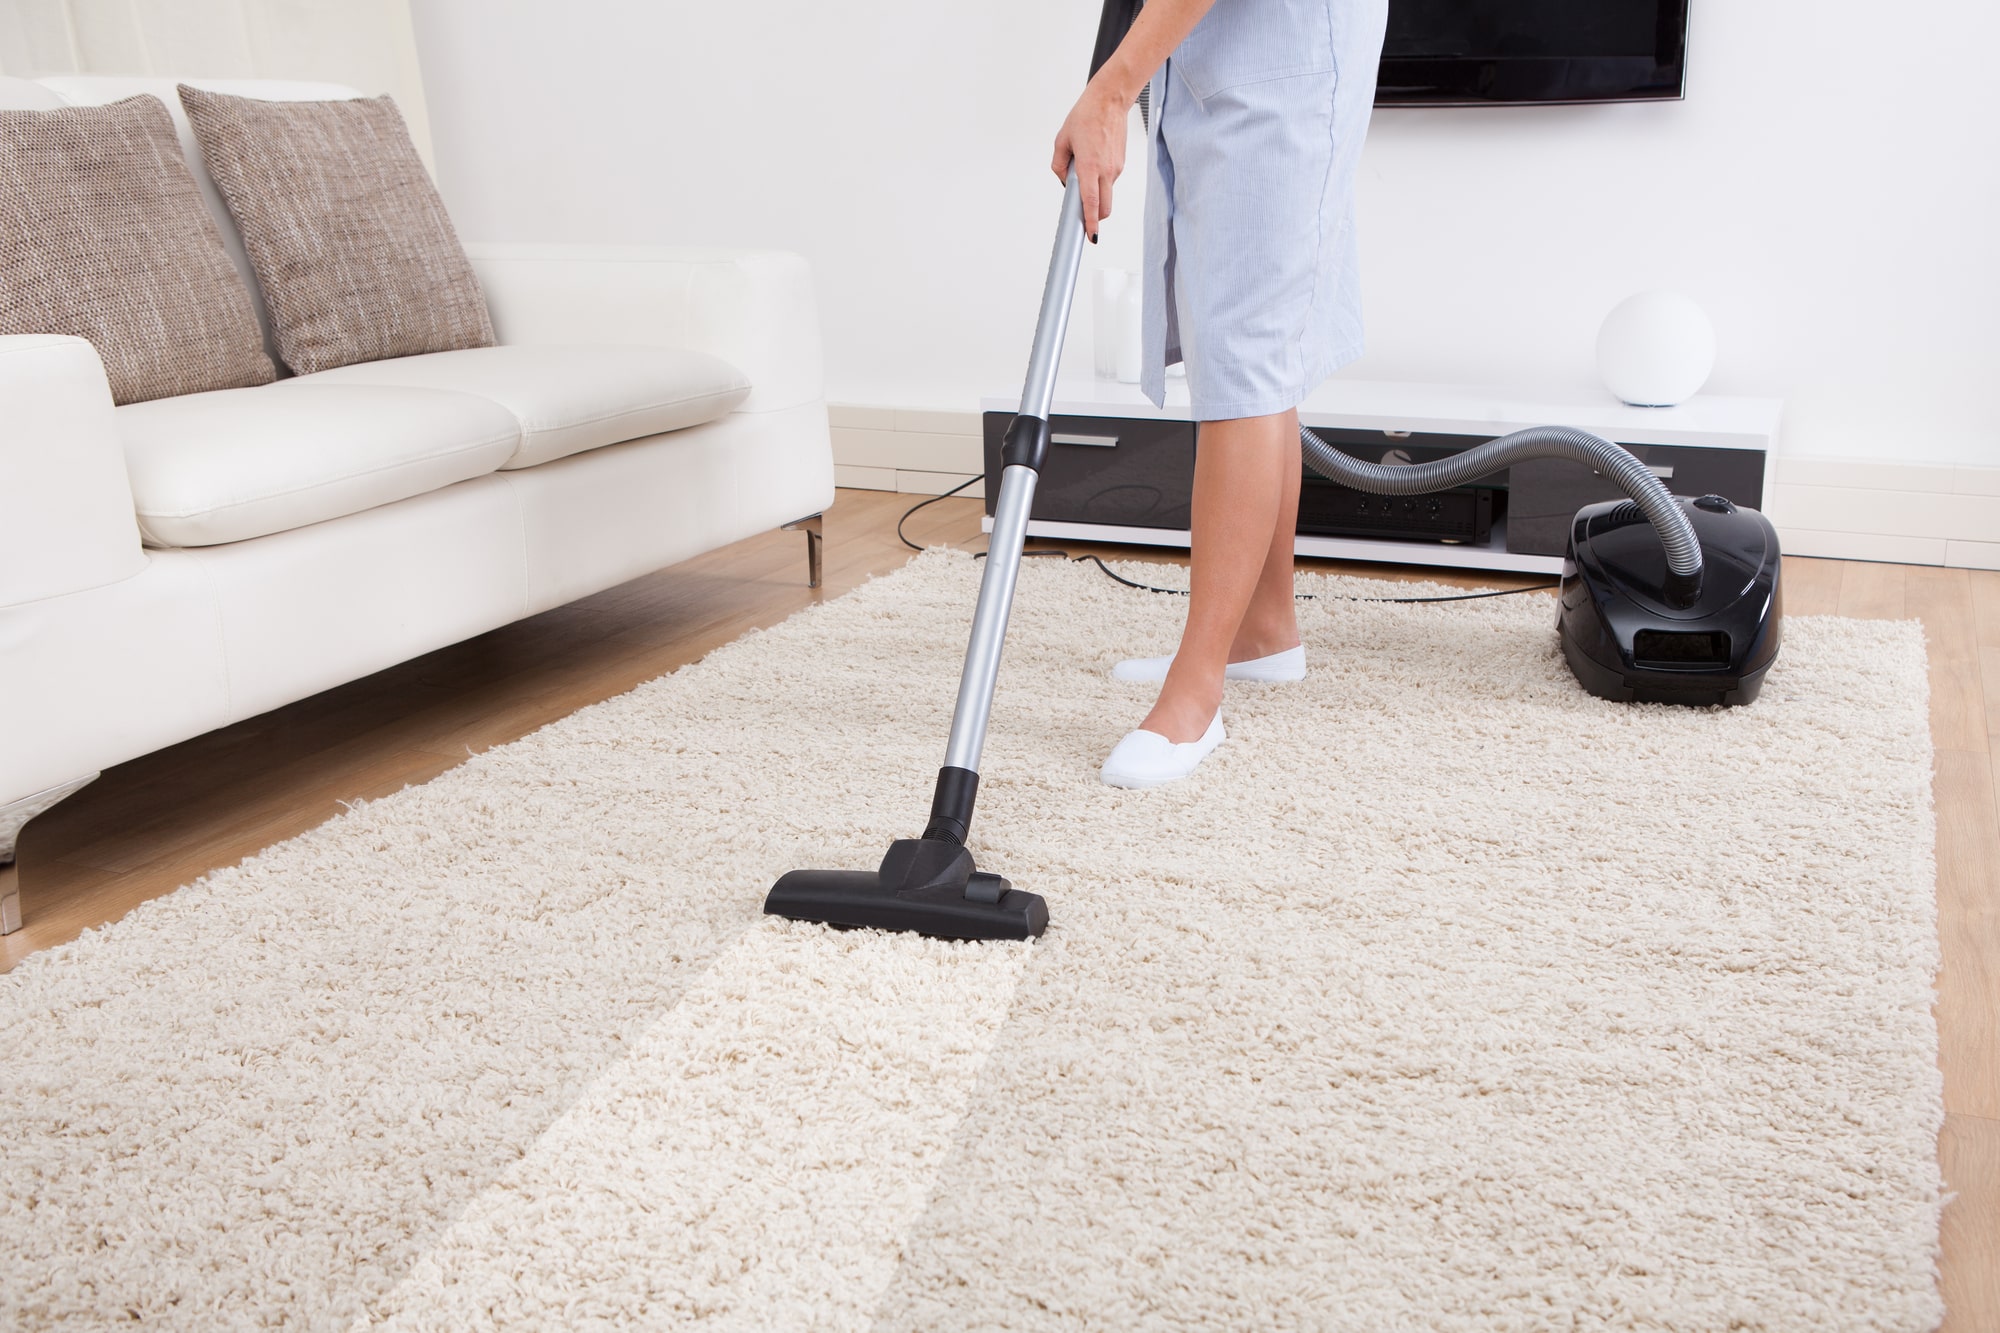 Carpet cleaning specials